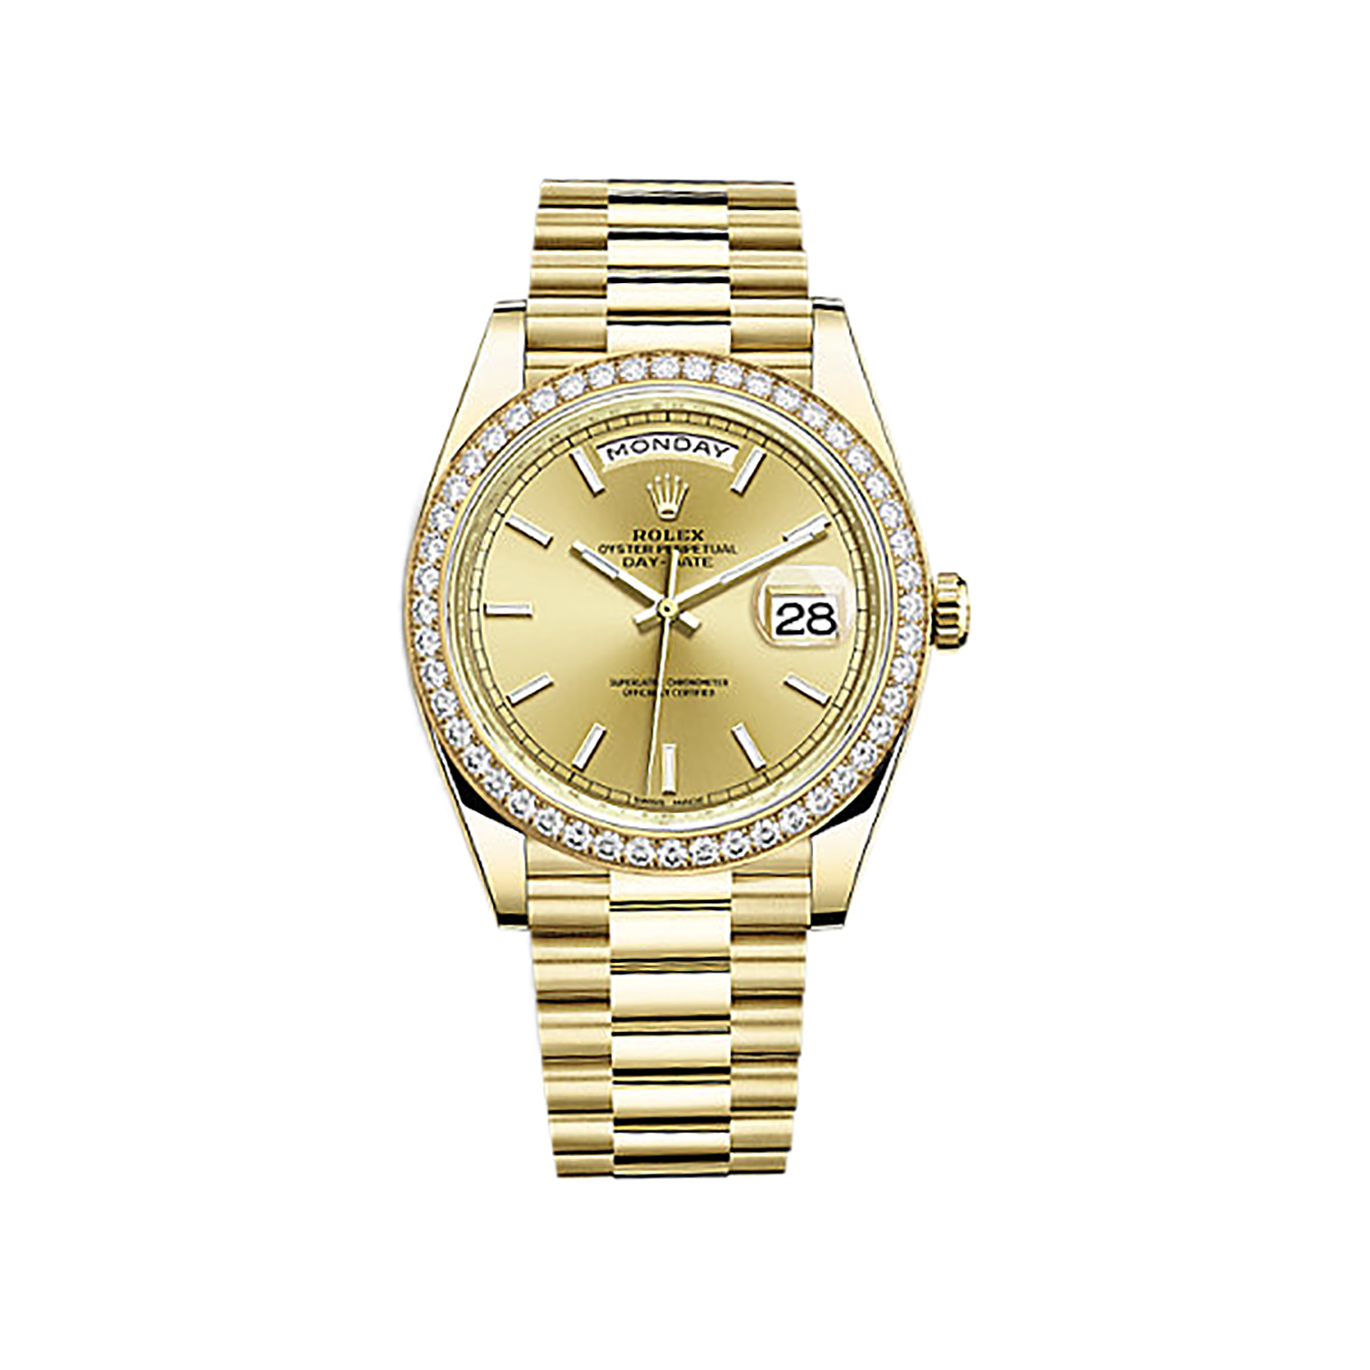 Day-Date 40 228348RBR Gold & Diamonds Watch (Champagne)